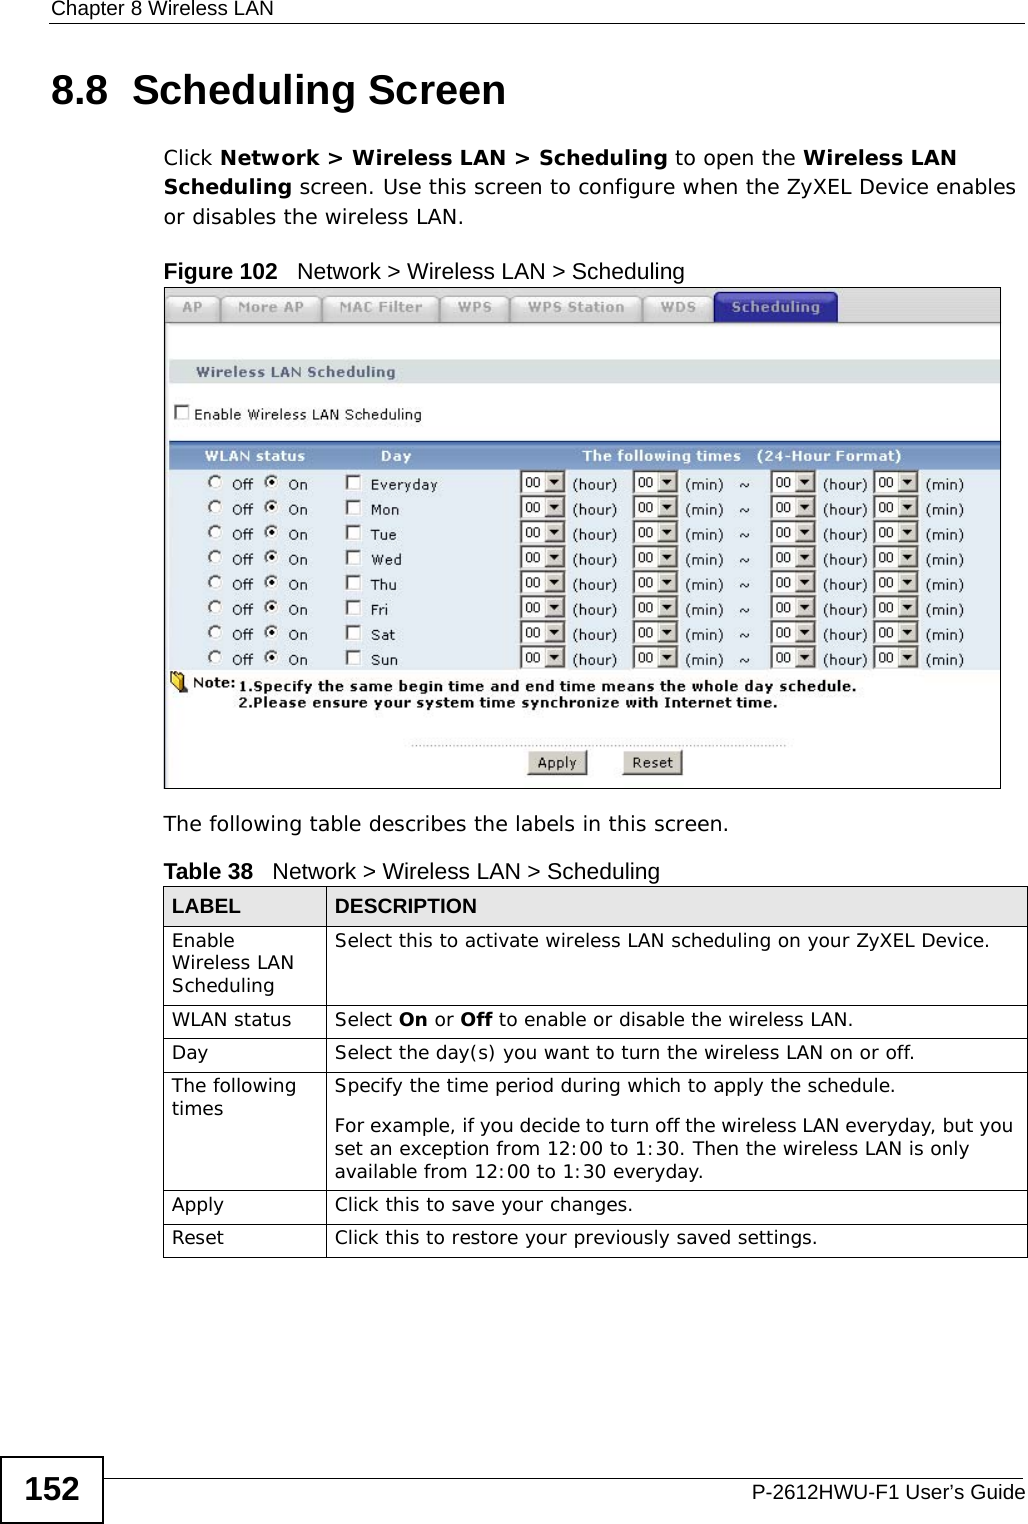 Chapter 8 Wireless LANP-2612HWU-F1 User’s Guide1528.8  Scheduling Screen Click Network &gt; Wireless LAN &gt; Scheduling to open the Wireless LAN Scheduling screen. Use this screen to configure when the ZyXEL Device enables or disables the wireless LAN.  Figure 102   Network &gt; Wireless LAN &gt; SchedulingThe following table describes the labels in this screen.Table 38   Network &gt; Wireless LAN &gt; SchedulingLABEL DESCRIPTIONEnable Wireless LAN SchedulingSelect this to activate wireless LAN scheduling on your ZyXEL Device.WLAN status Select On or Off to enable or disable the wireless LAN.Day Select the day(s) you want to turn the wireless LAN on or off.The following times Specify the time period during which to apply the schedule.For example, if you decide to turn off the wireless LAN everyday, but you set an exception from 12:00 to 1:30. Then the wireless LAN is only available from 12:00 to 1:30 everyday.Apply Click this to save your changes.Reset Click this to restore your previously saved settings.